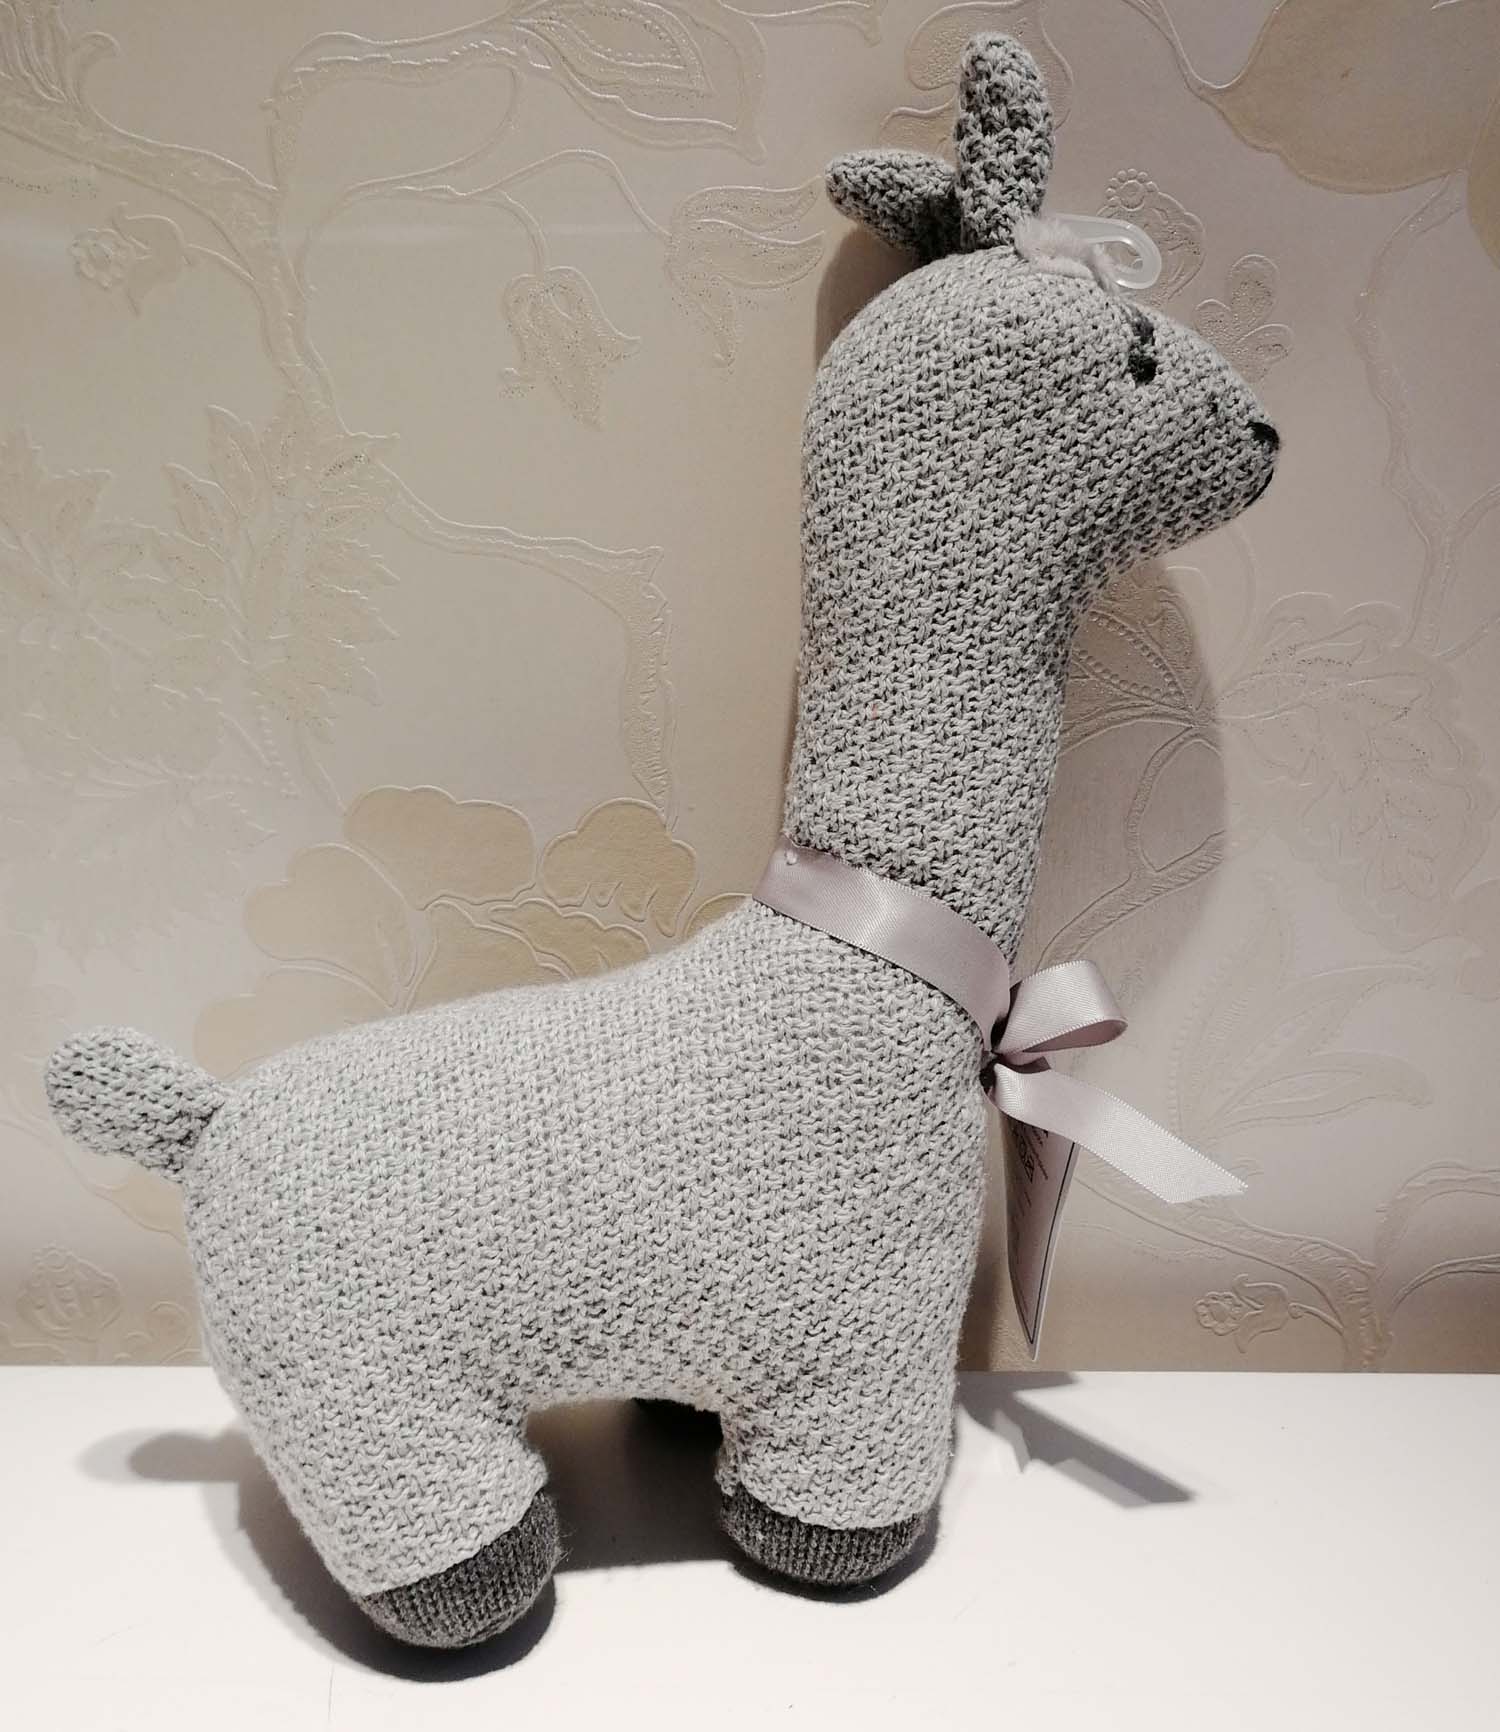 Chinese plush toy of knitted llama